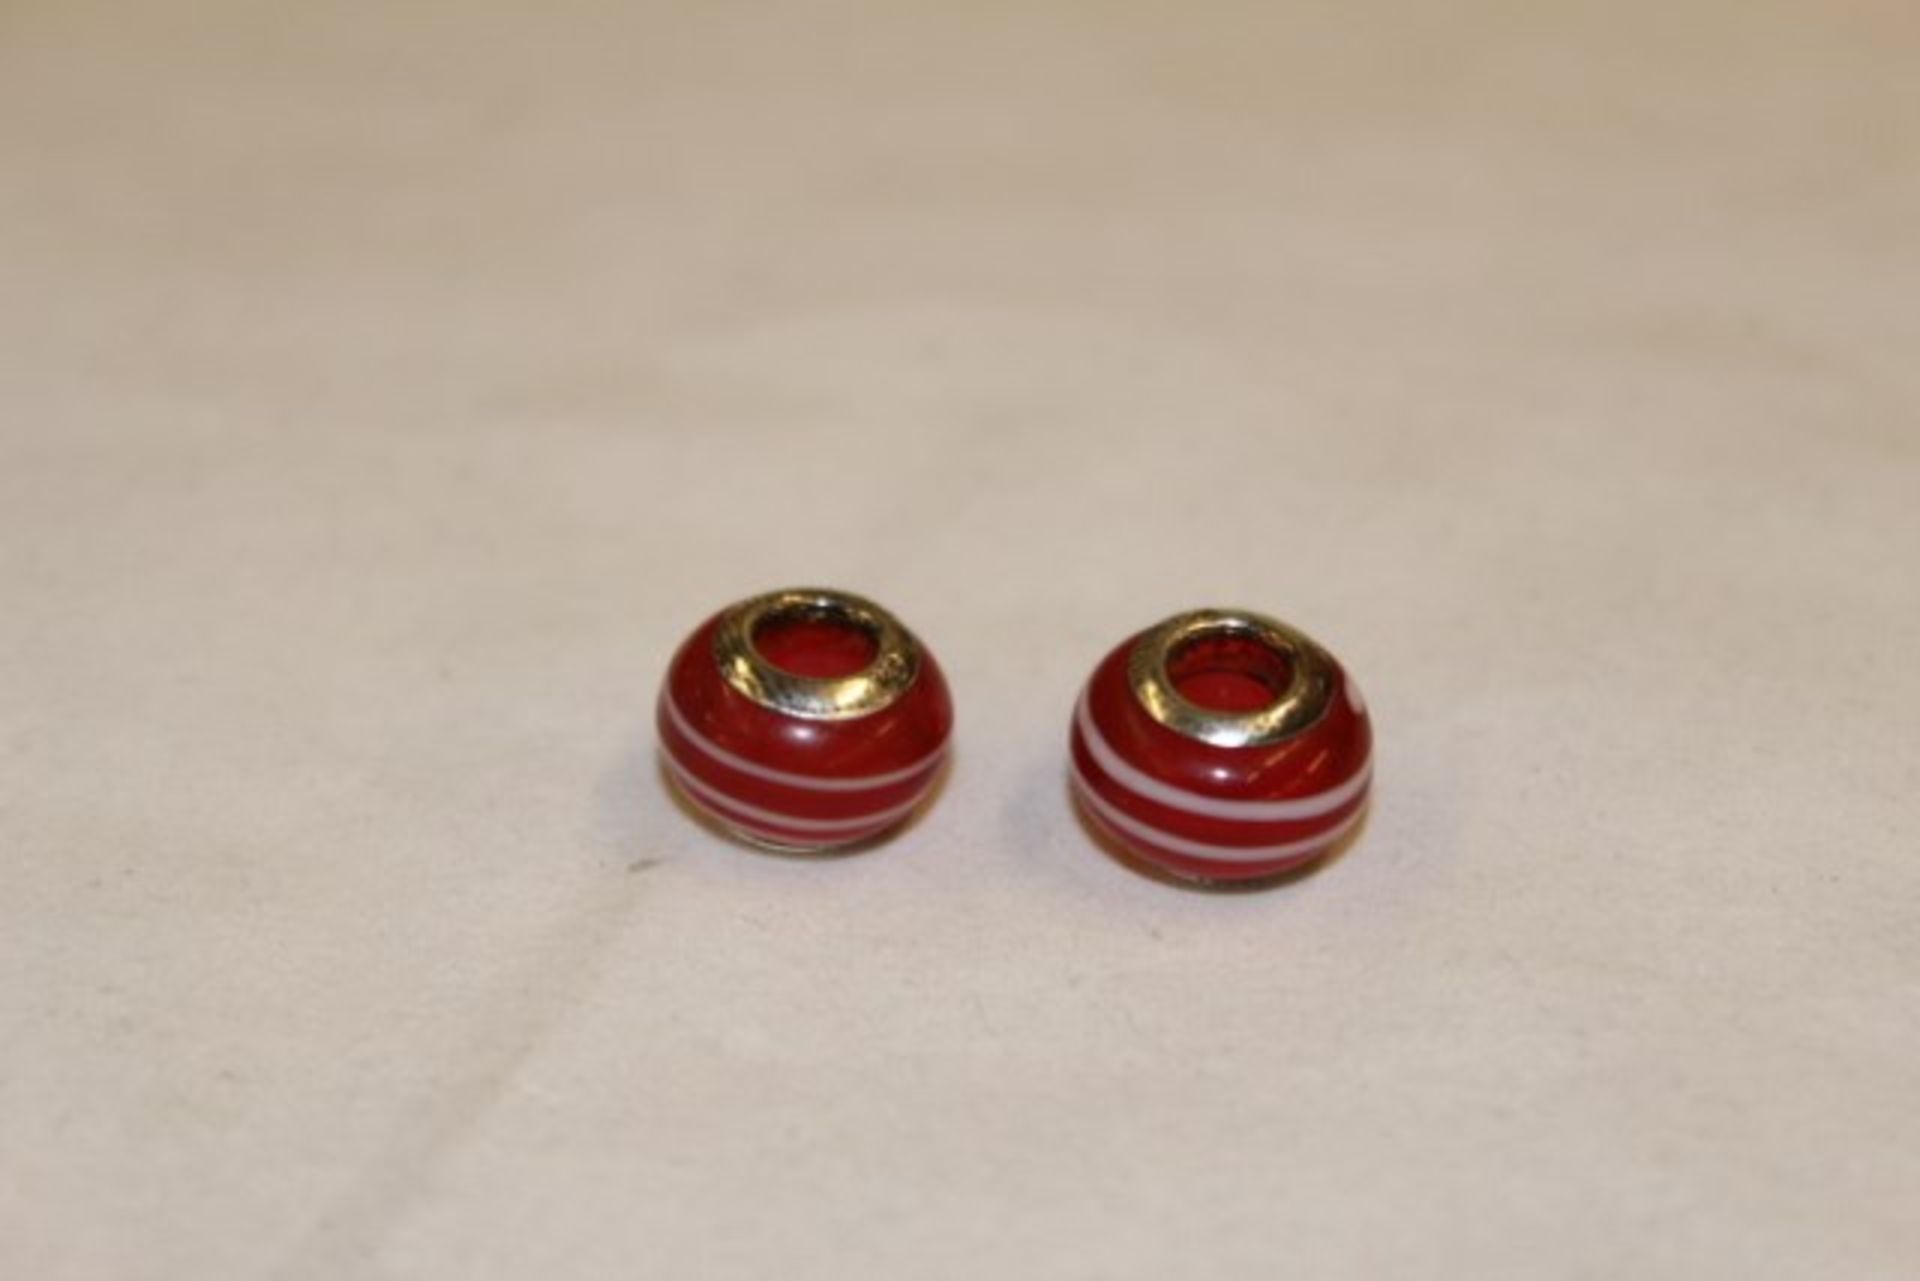 V Two WM Red & White Bead Charms X 2 YOUR BID PRICE TO BE MULTIPLIED BY TWO